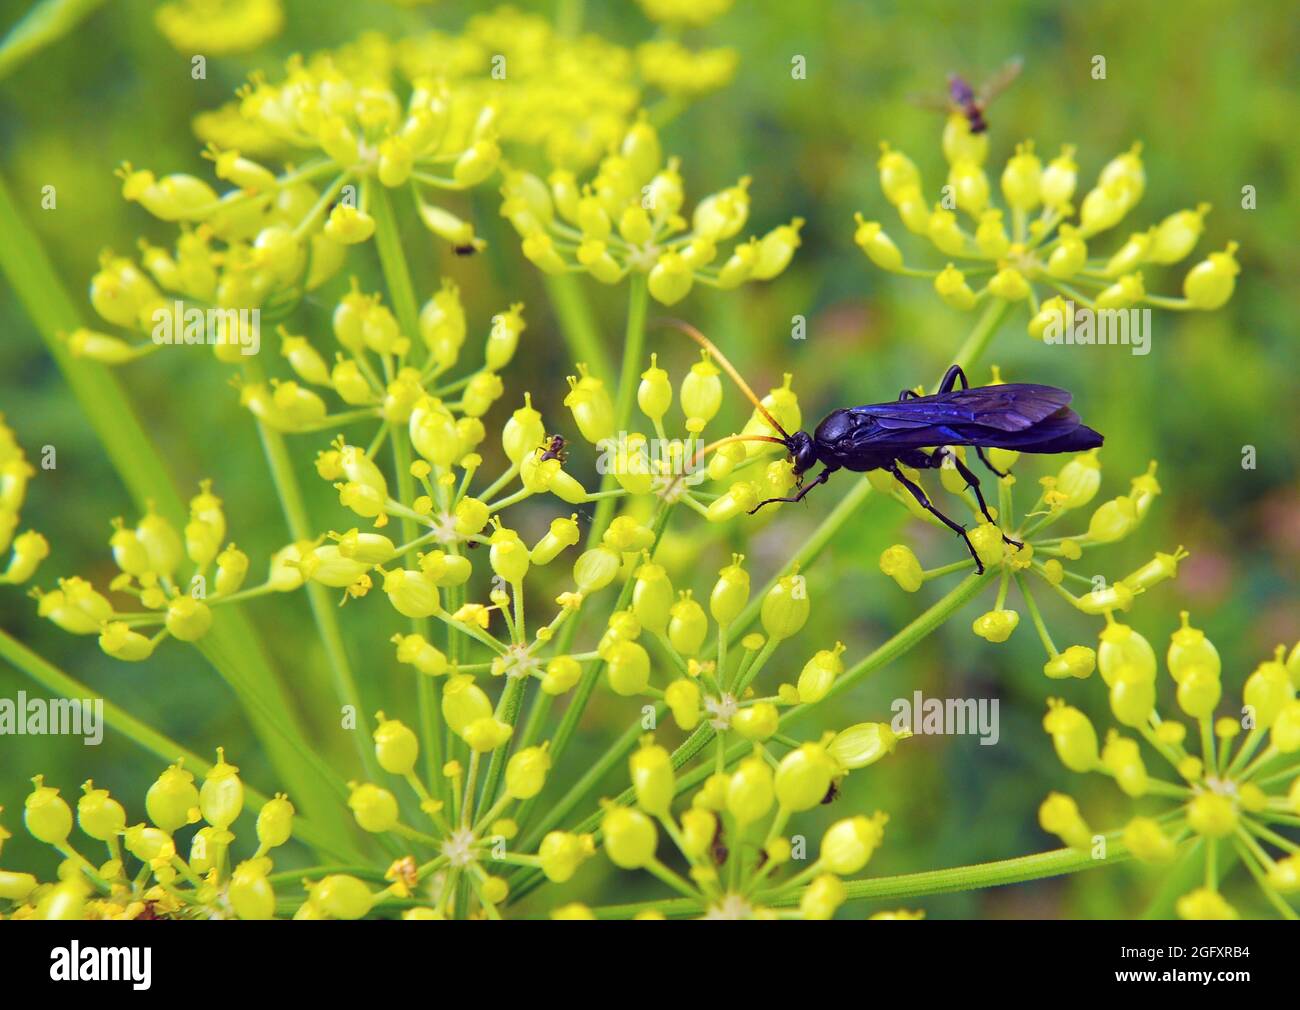 Close-up of a bent-shielded besieger wasp collecting nectar from the small yellow flowers on a wild parsnip plant growing in a field. Stock Photo